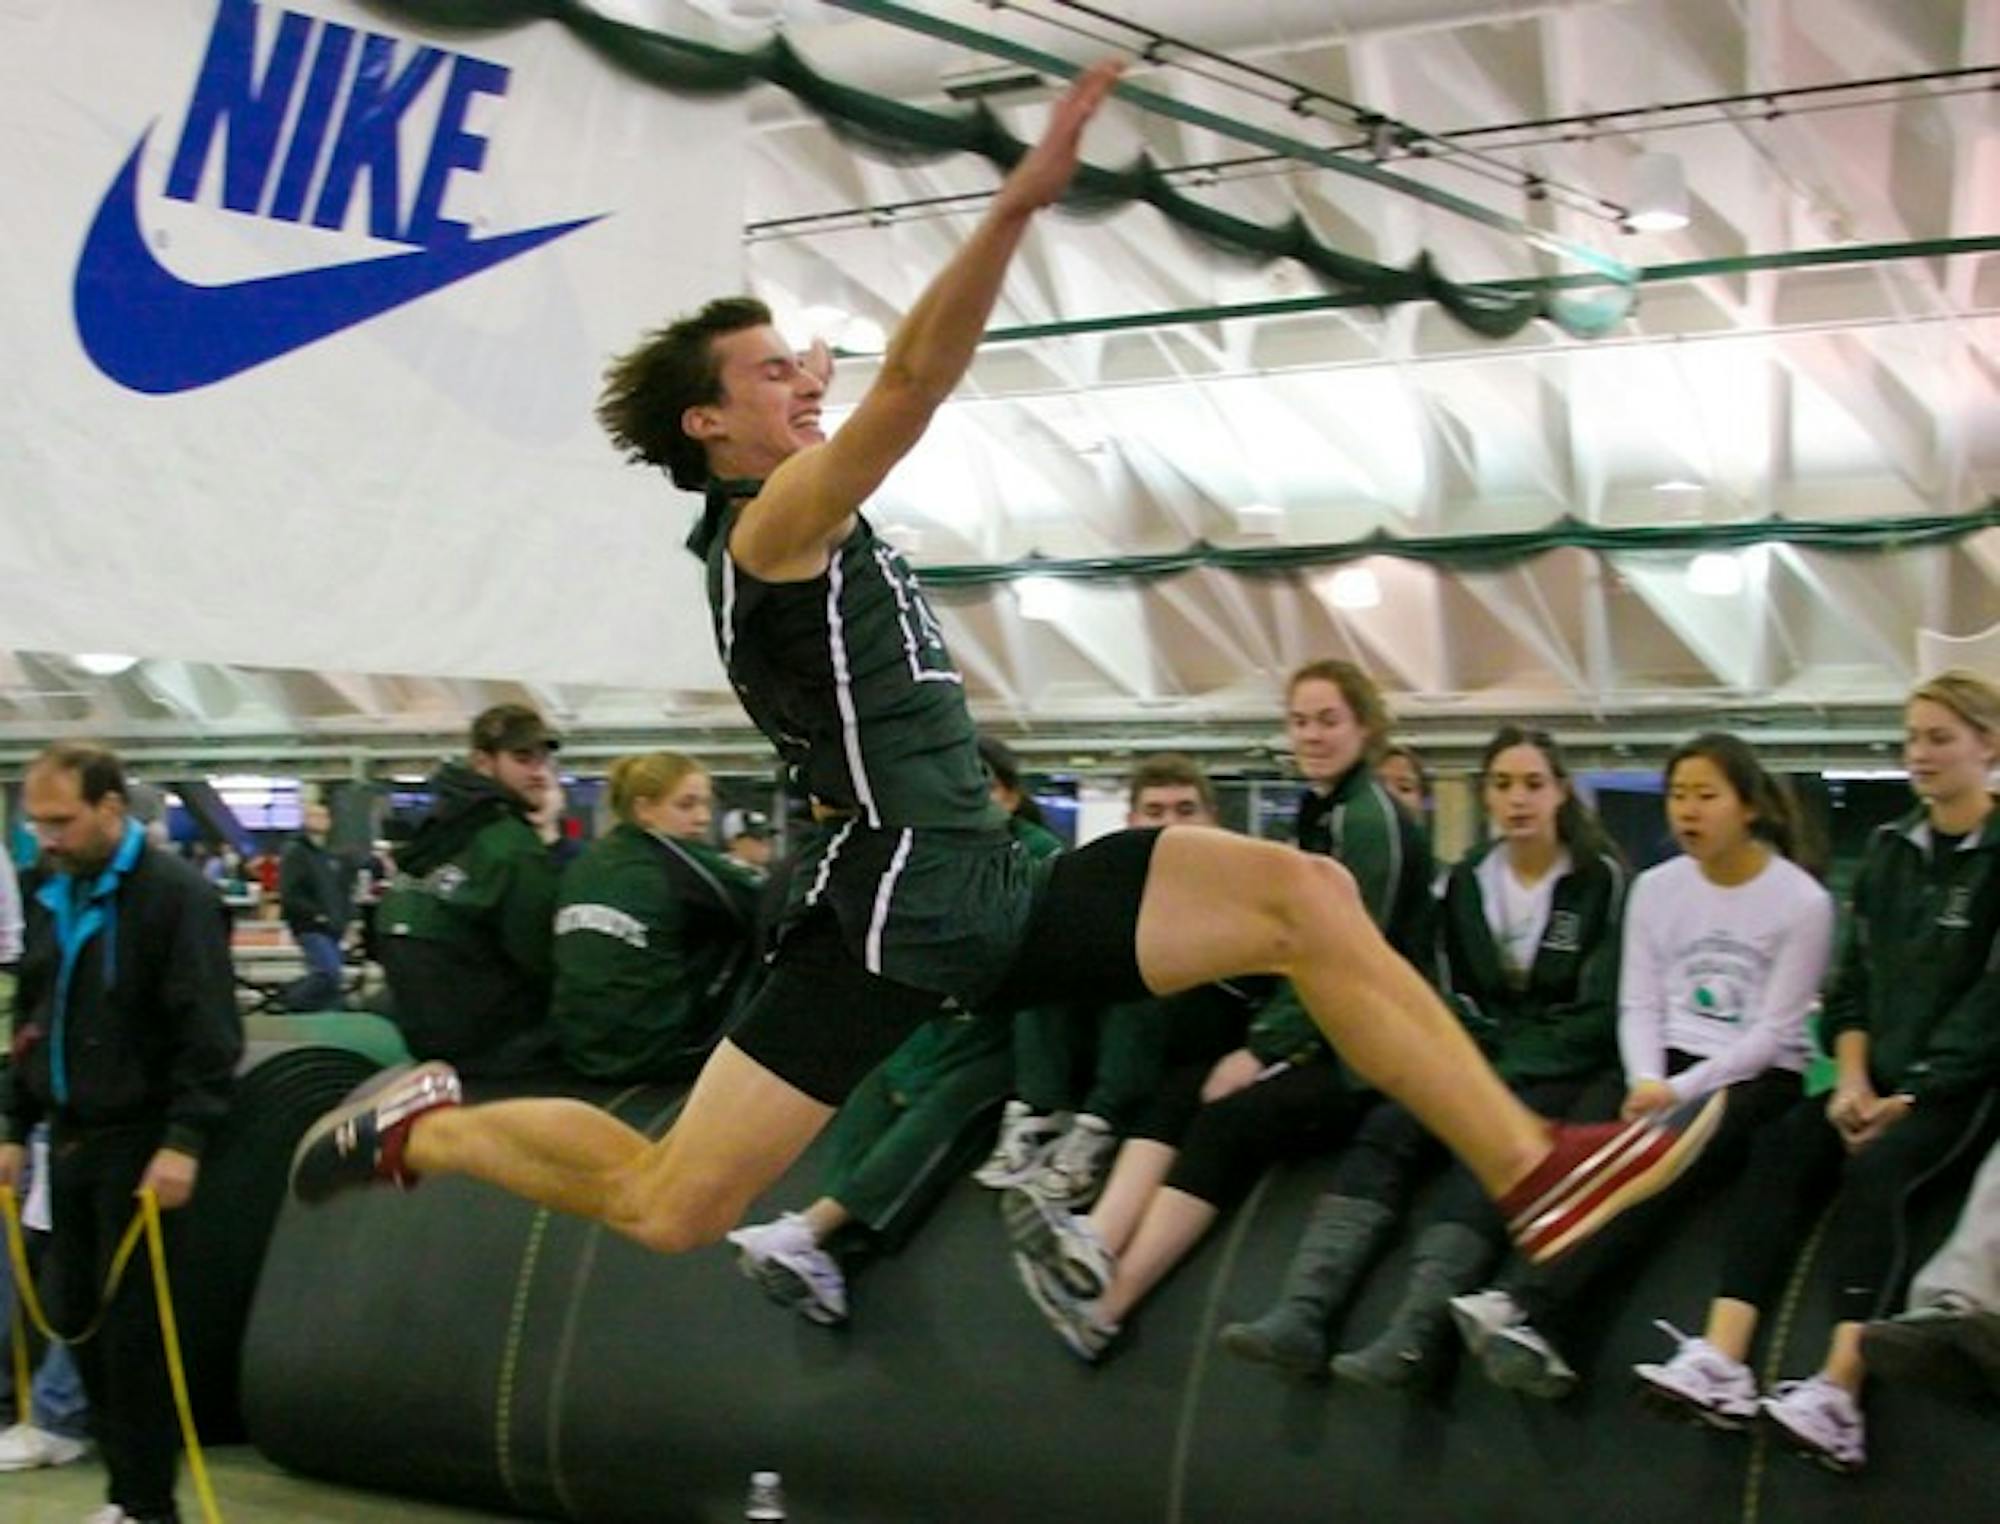 Several members of the Big Green men's track team will head to Boston, Mass. for the ICA4 meet this weekend after qualifying for the event at the Indoor Ivy League Heptagonal Championships.